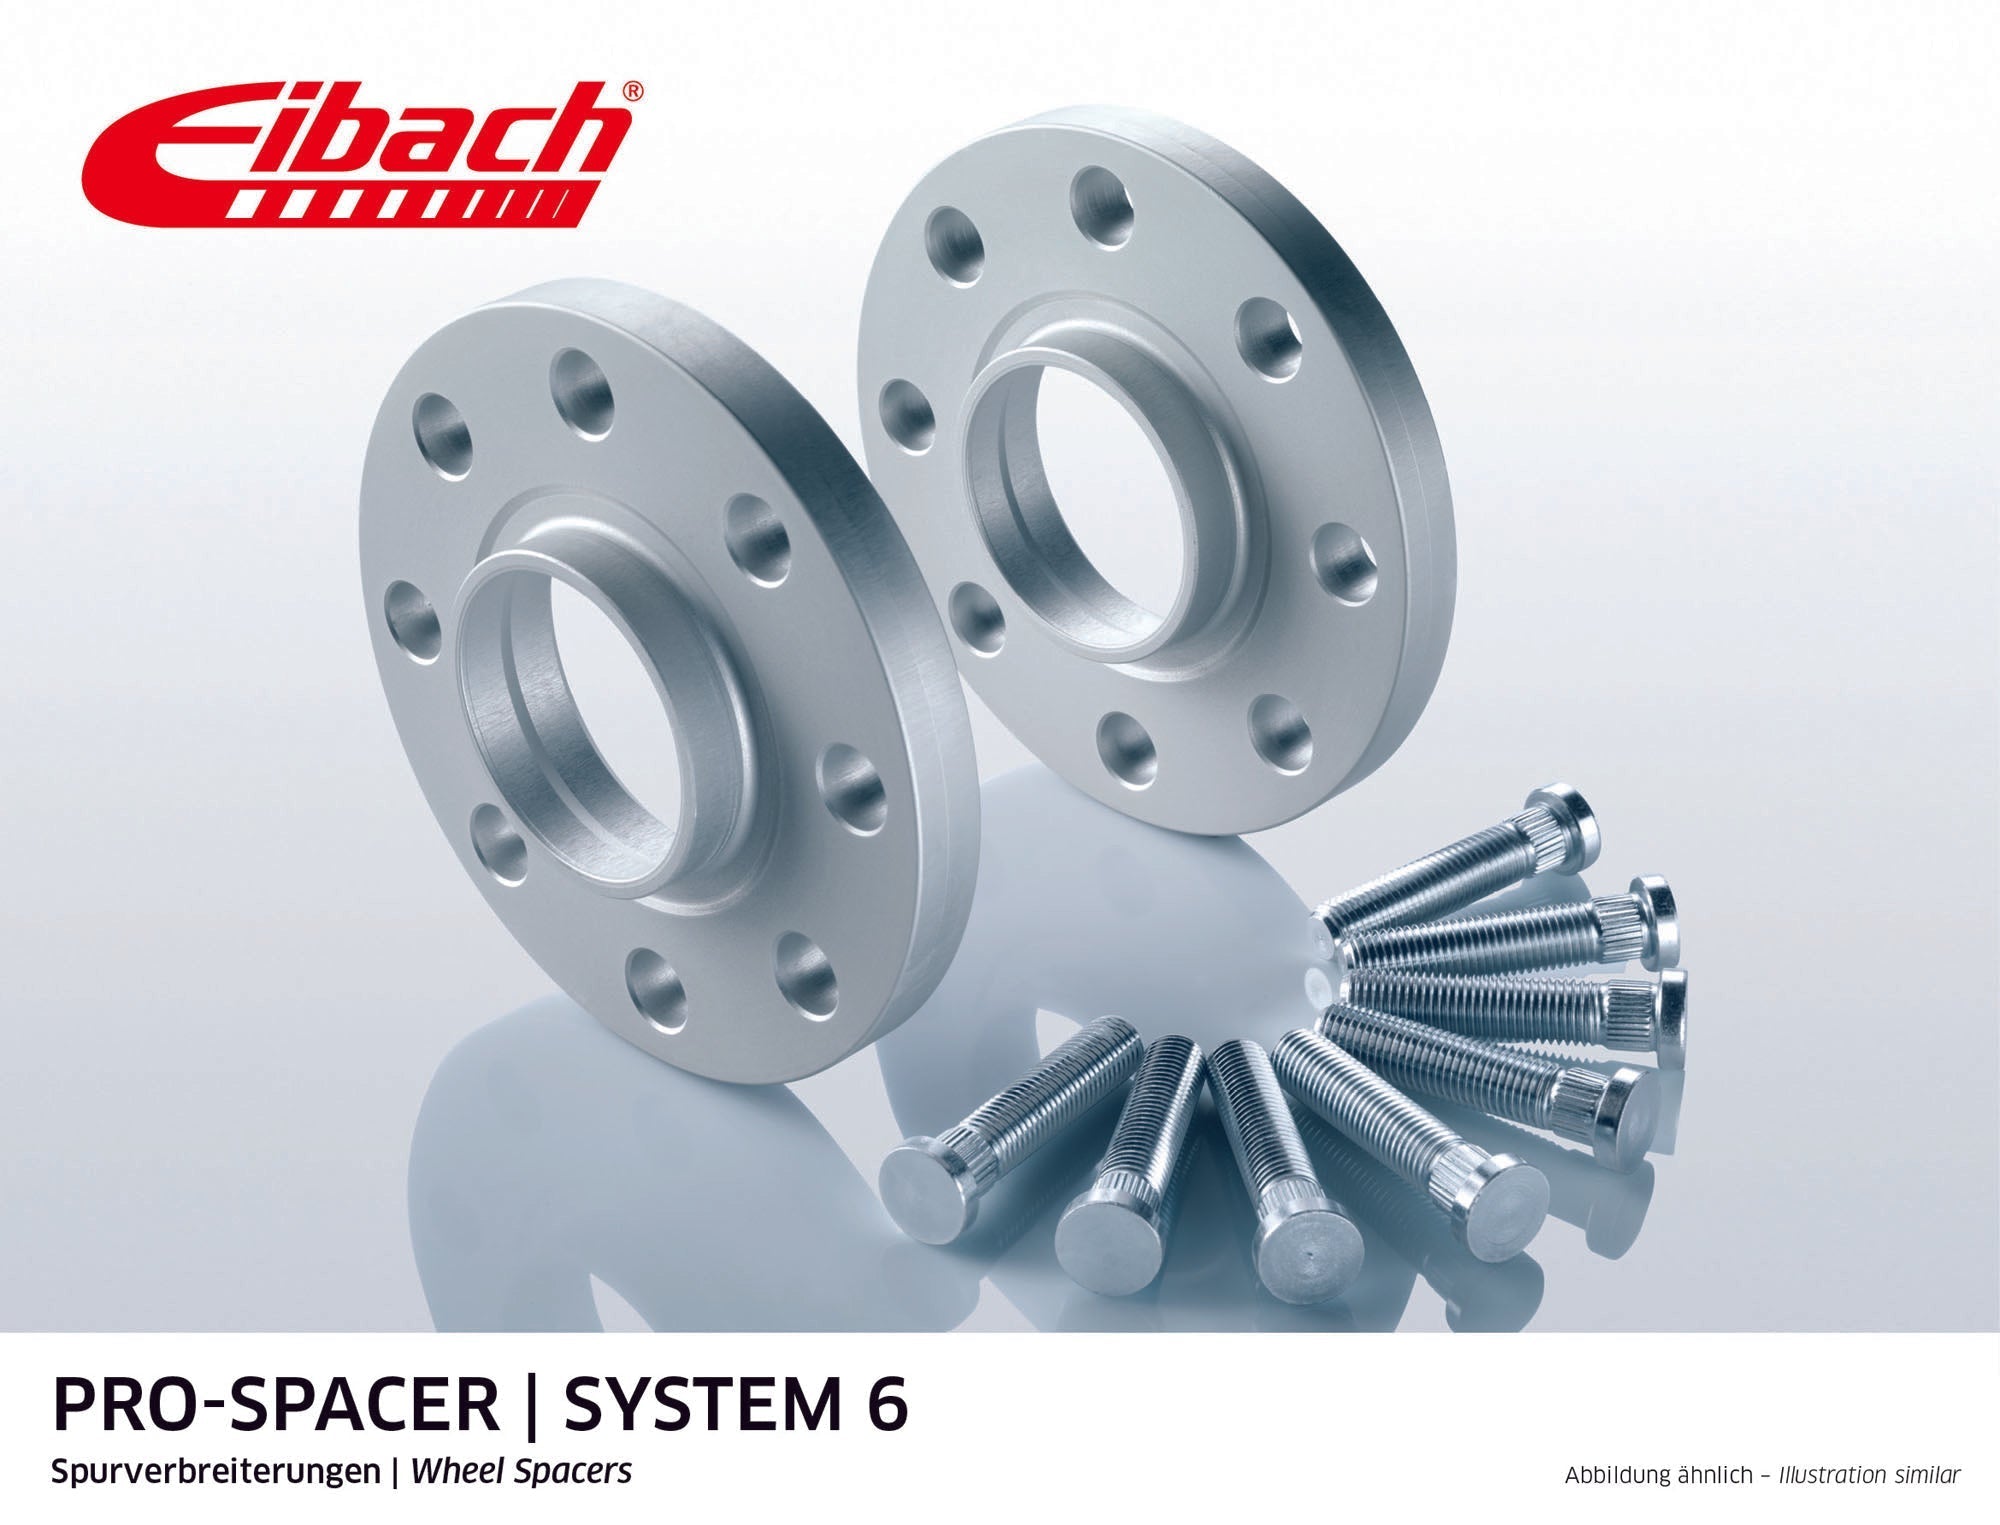 Eibach 15mm Pro-Spacer - Silver Anodized Wheel Spacer 911 1988-94 #S90-6-15-018